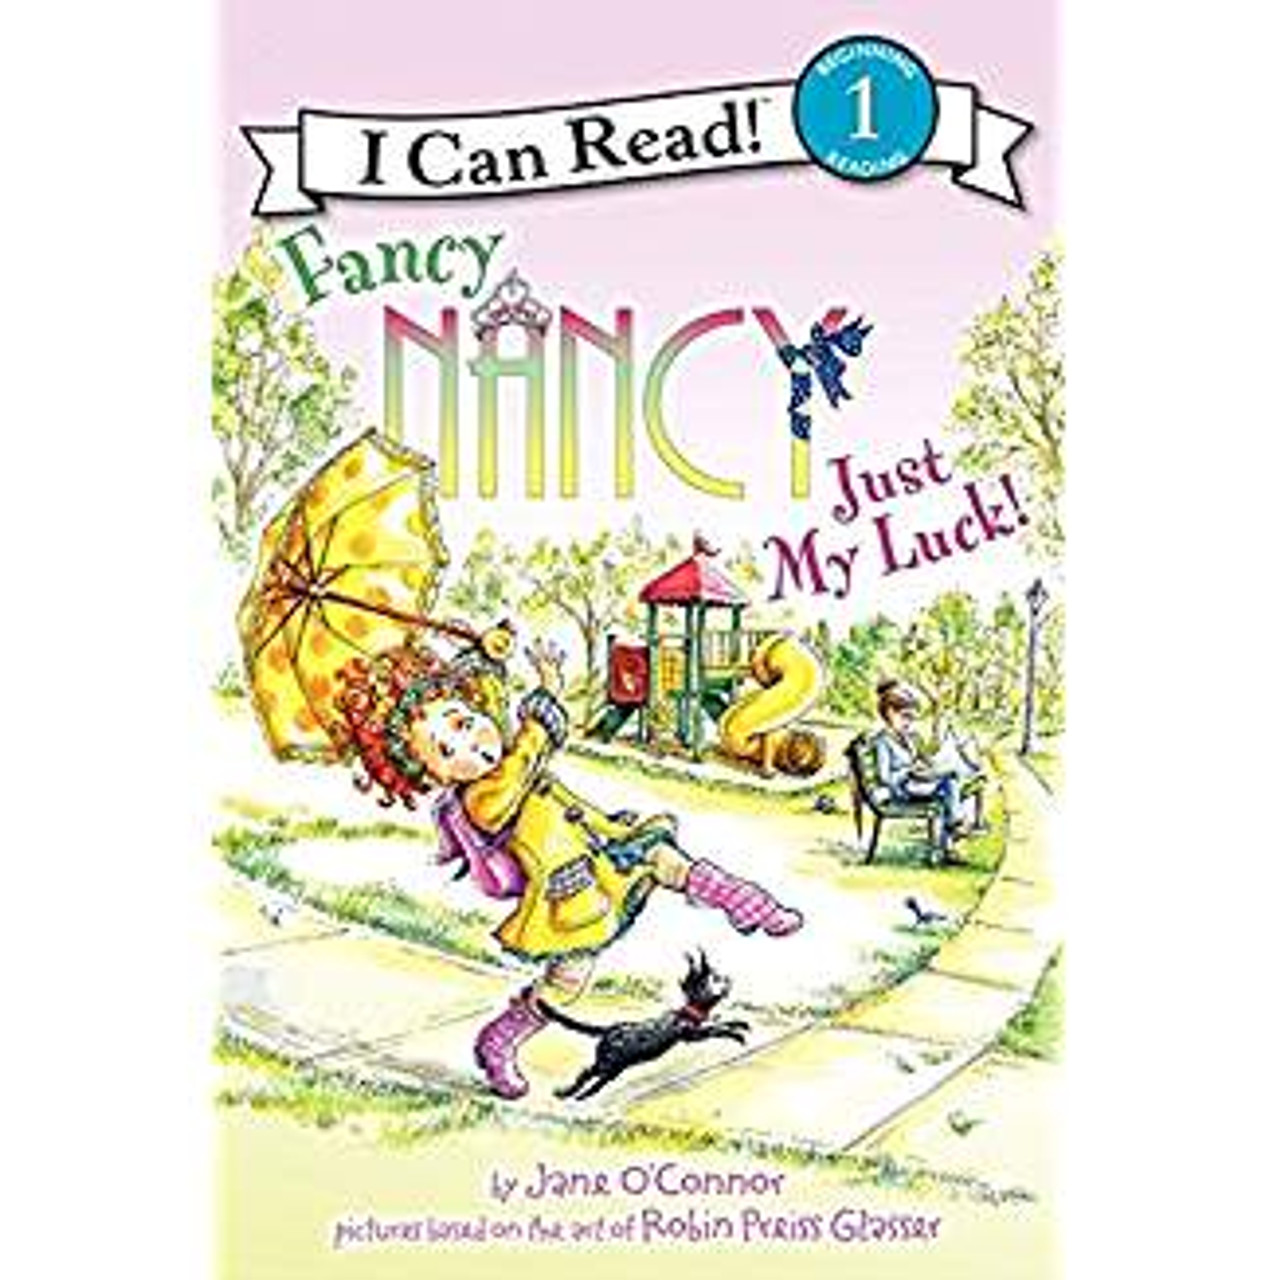 Seeing a four-leaf clover at a show-and-share, Fancy Nancy becomes superstitious and goes overboard trying to keep track of everything that's lucky and unlucky before deciding to settle on what she truly believes.